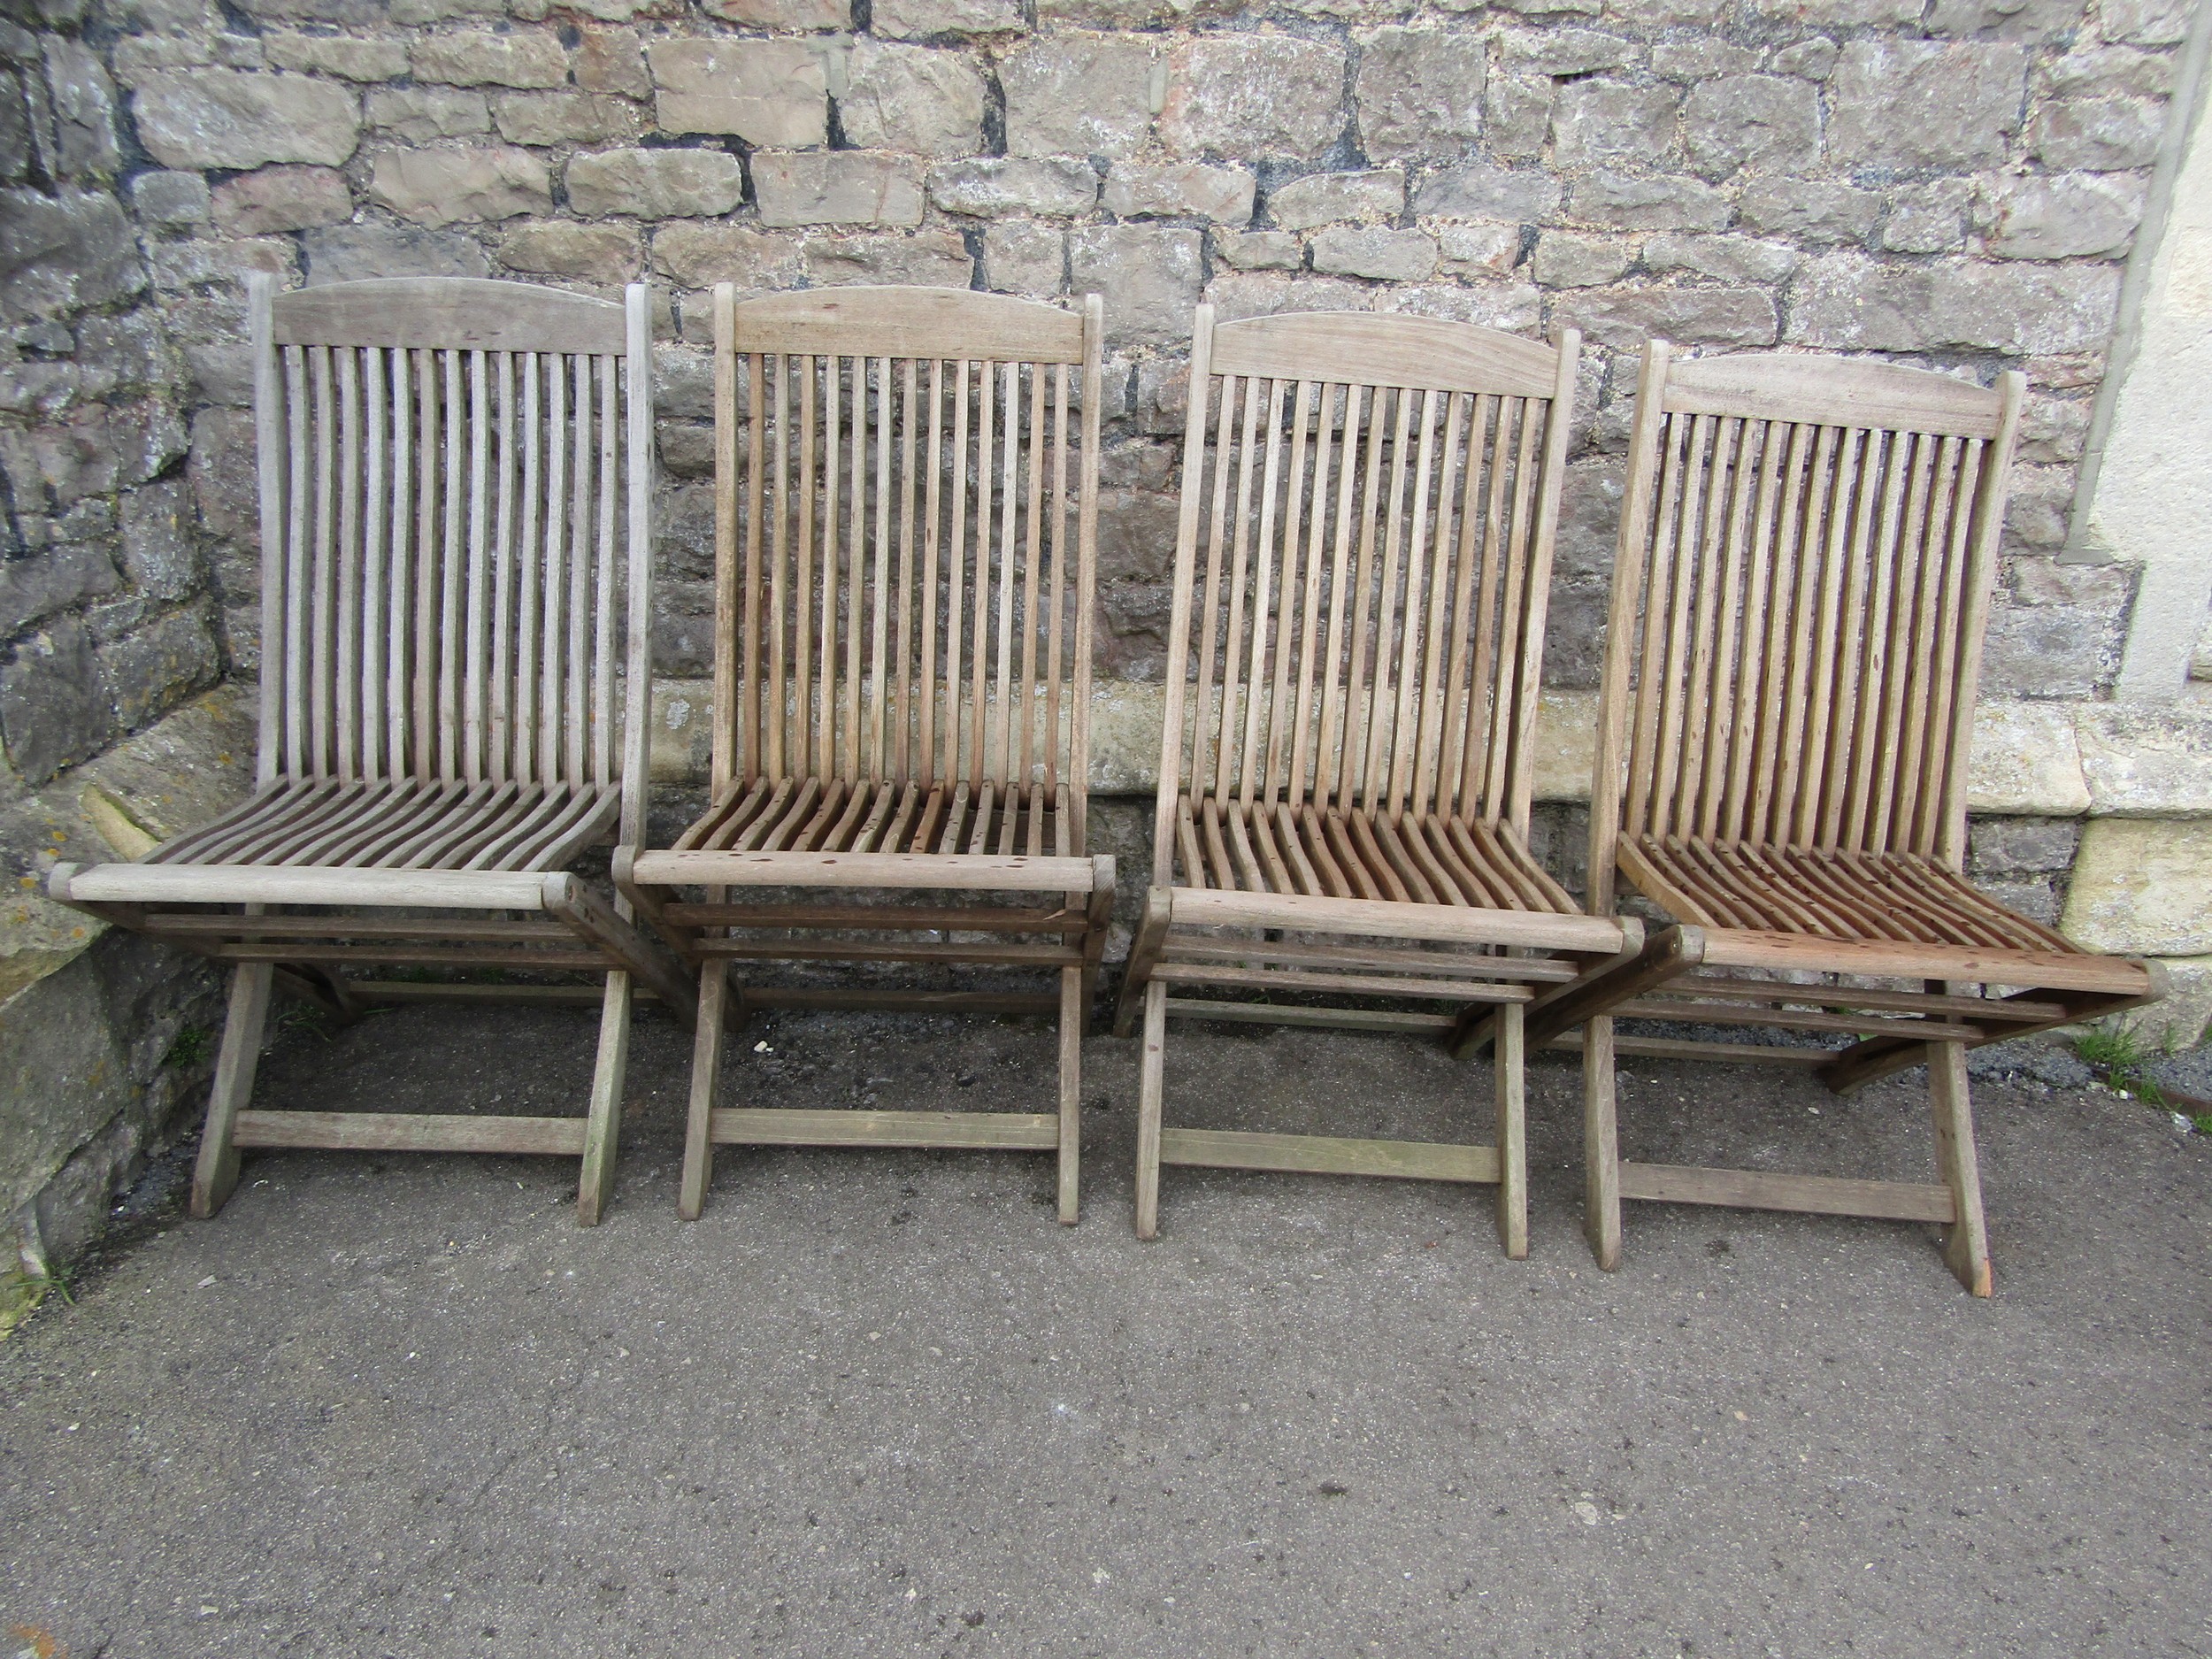 A set of four weathered Windsor Set folding teak garden chairs with slatted seats and backs